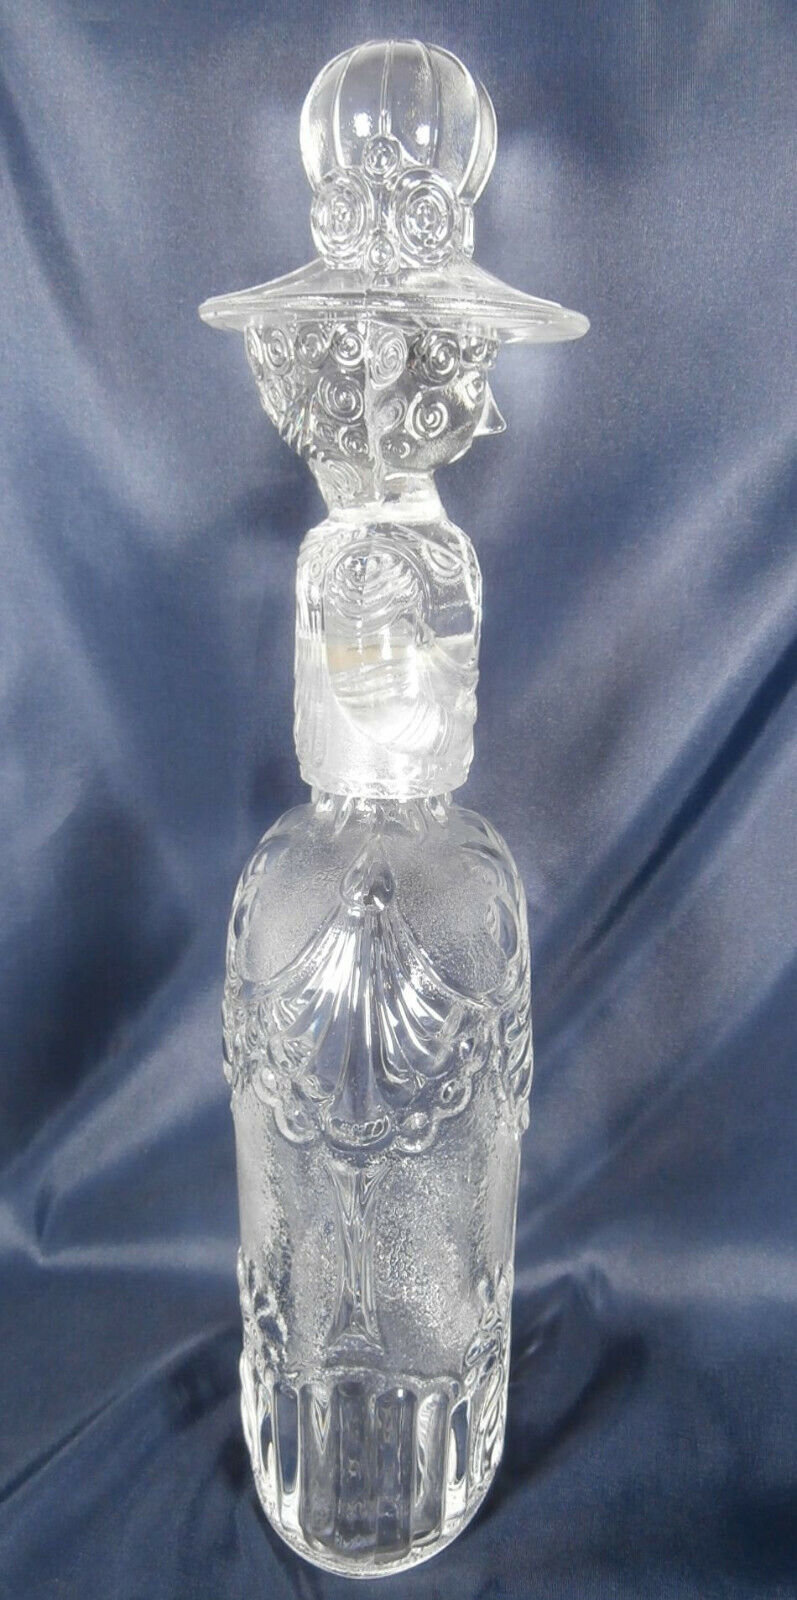 💥 Rosenthal Decanter + Stopper Crystal Glass Bjorn Wiinblad Lady in nice dress